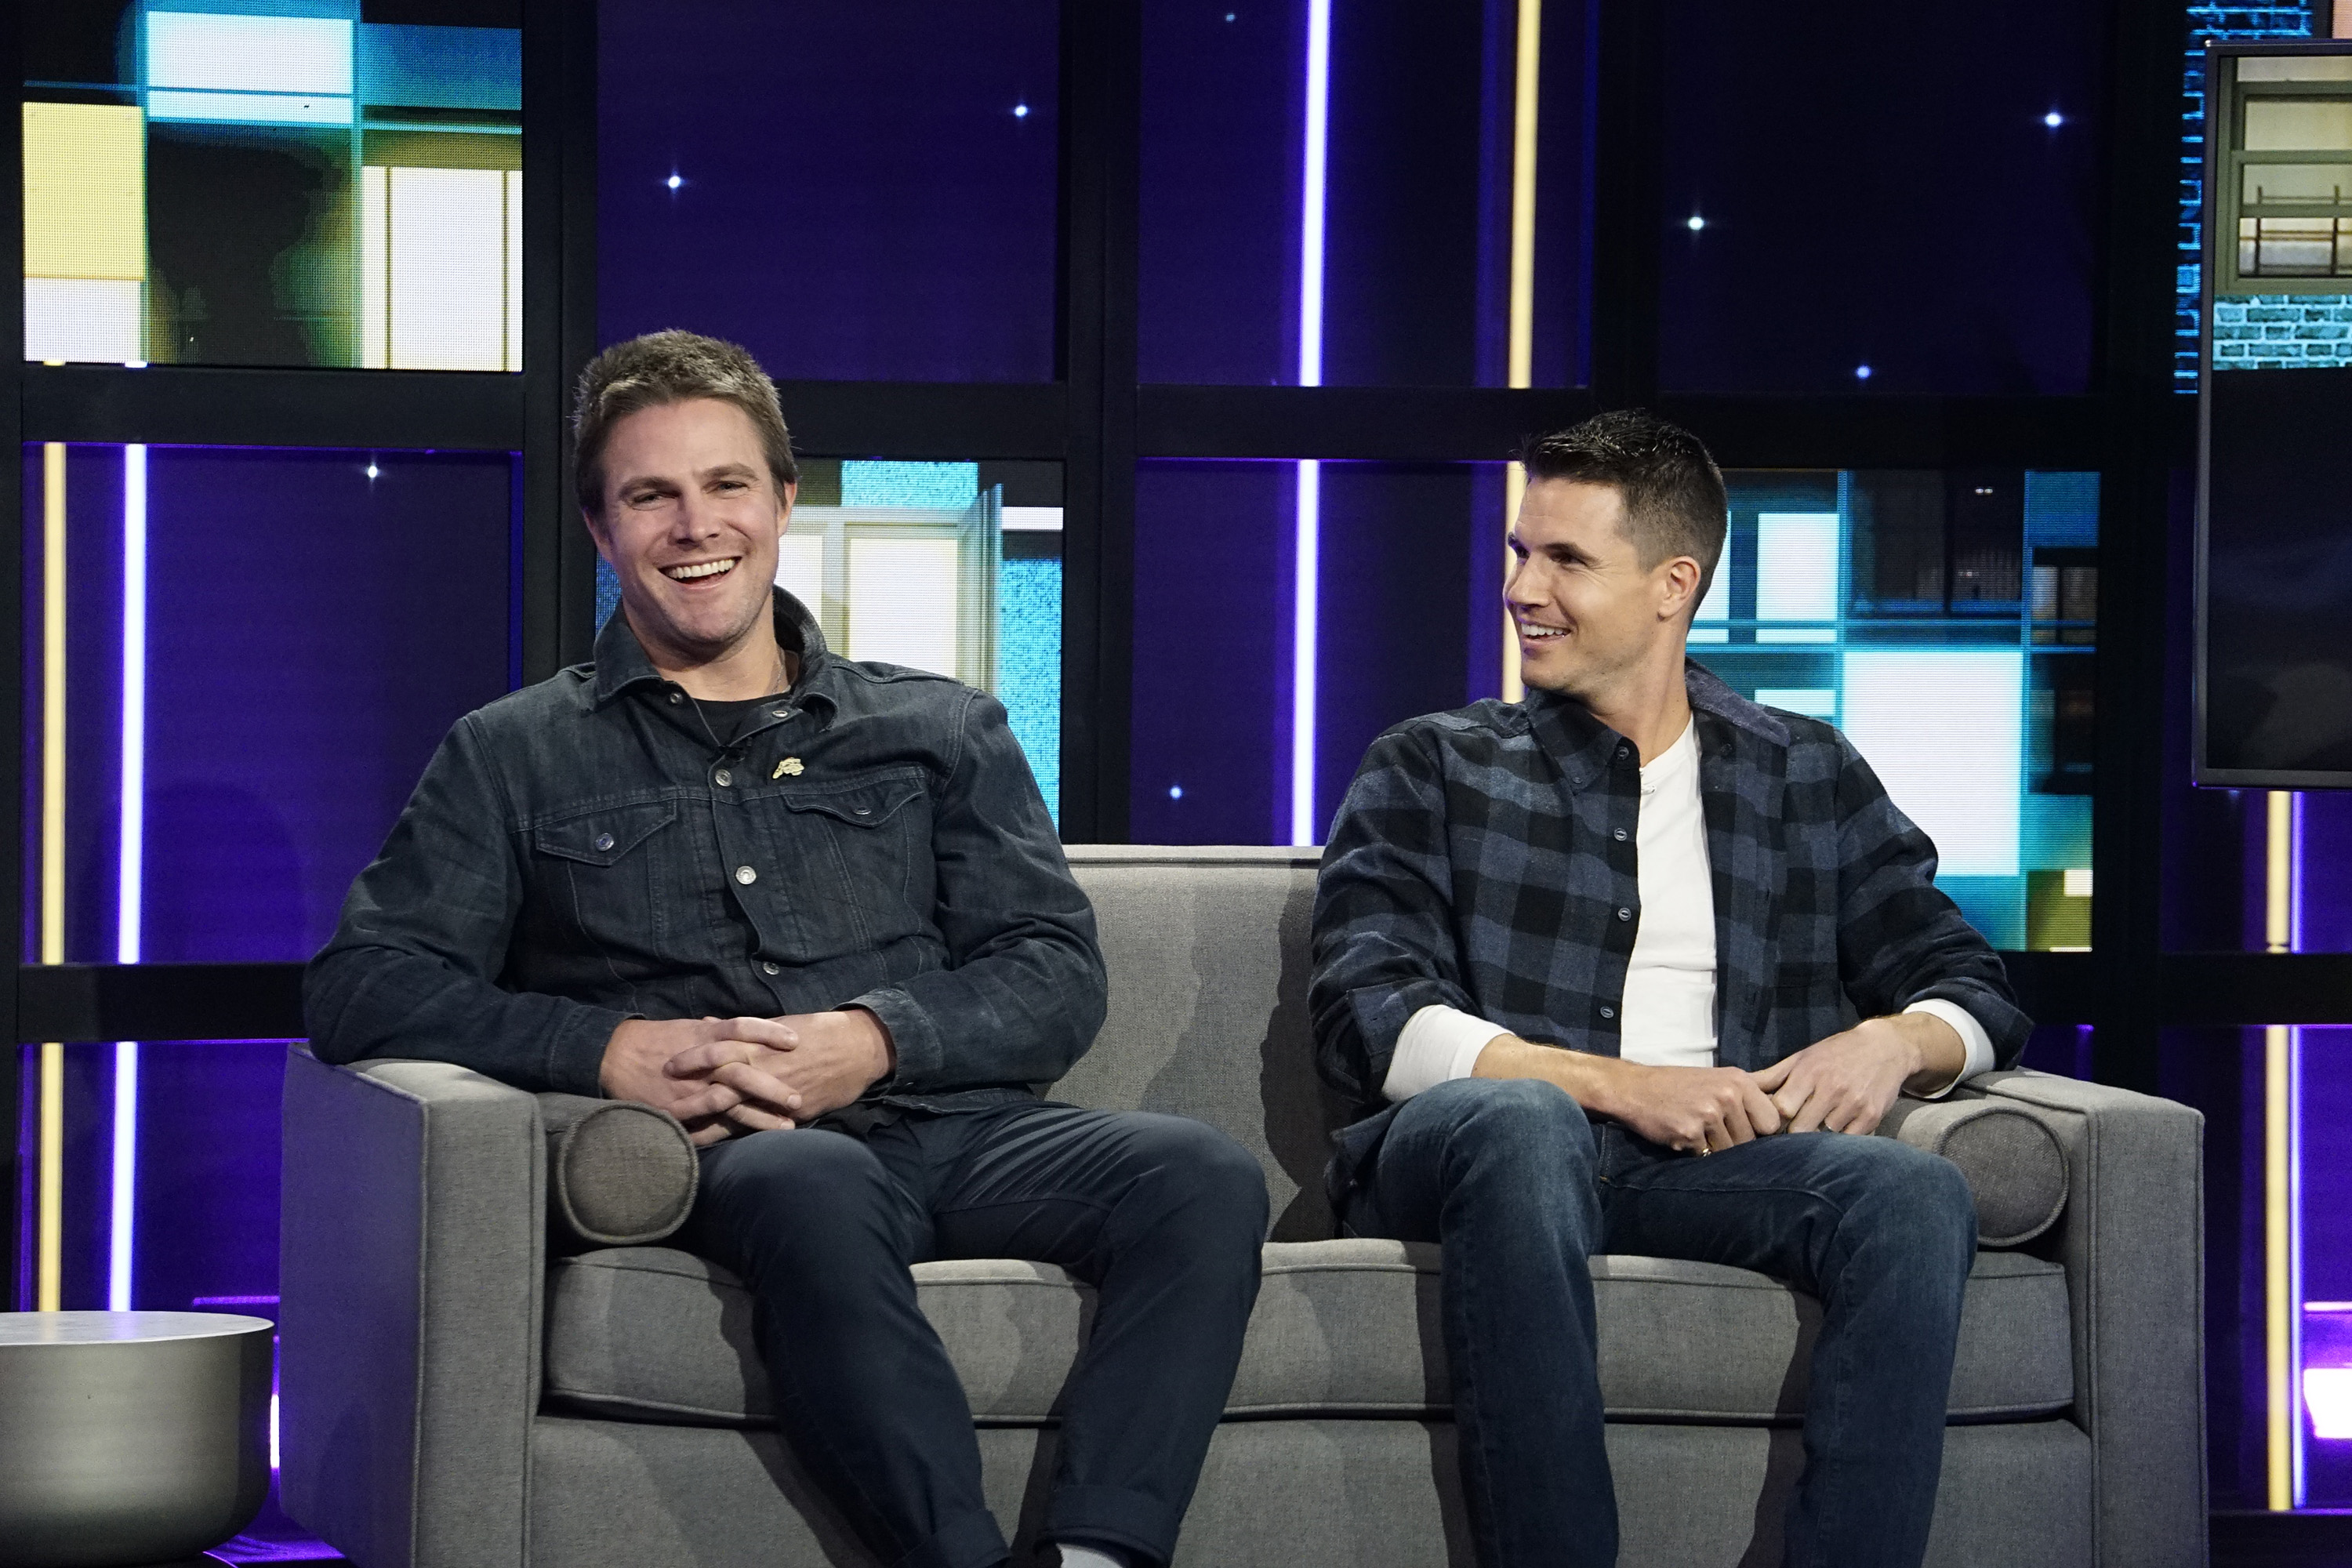 Stephen Amell and Robbie Amell on "A Little Late With Lilly Singh" on December 6, 2019. | Source: Getty Images